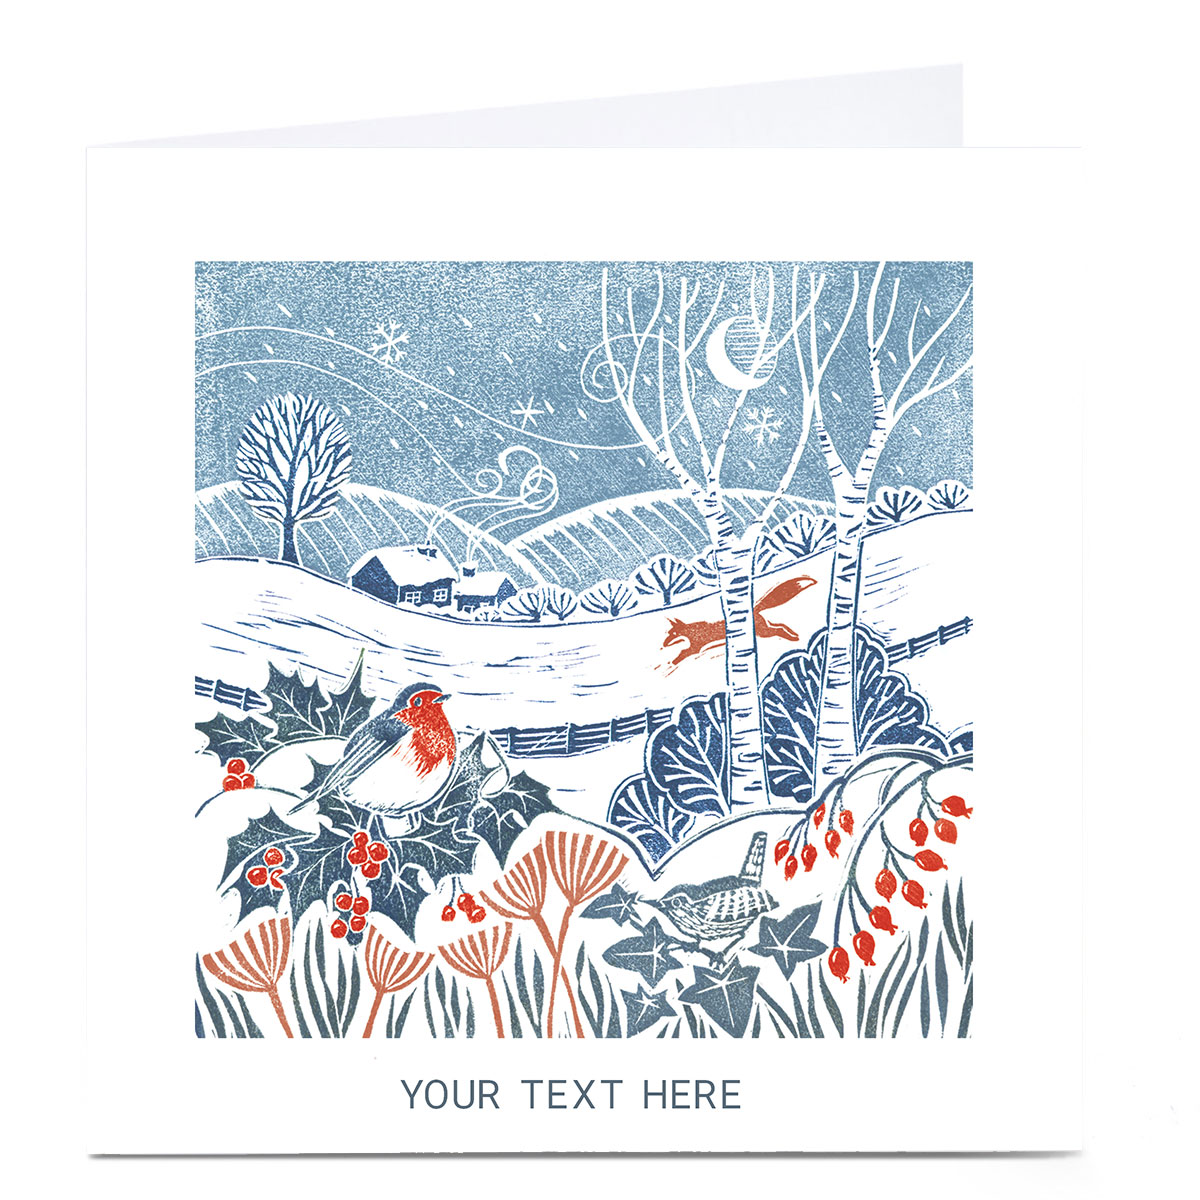 Personalised Christmas Card - Snowy Countryside Illustration